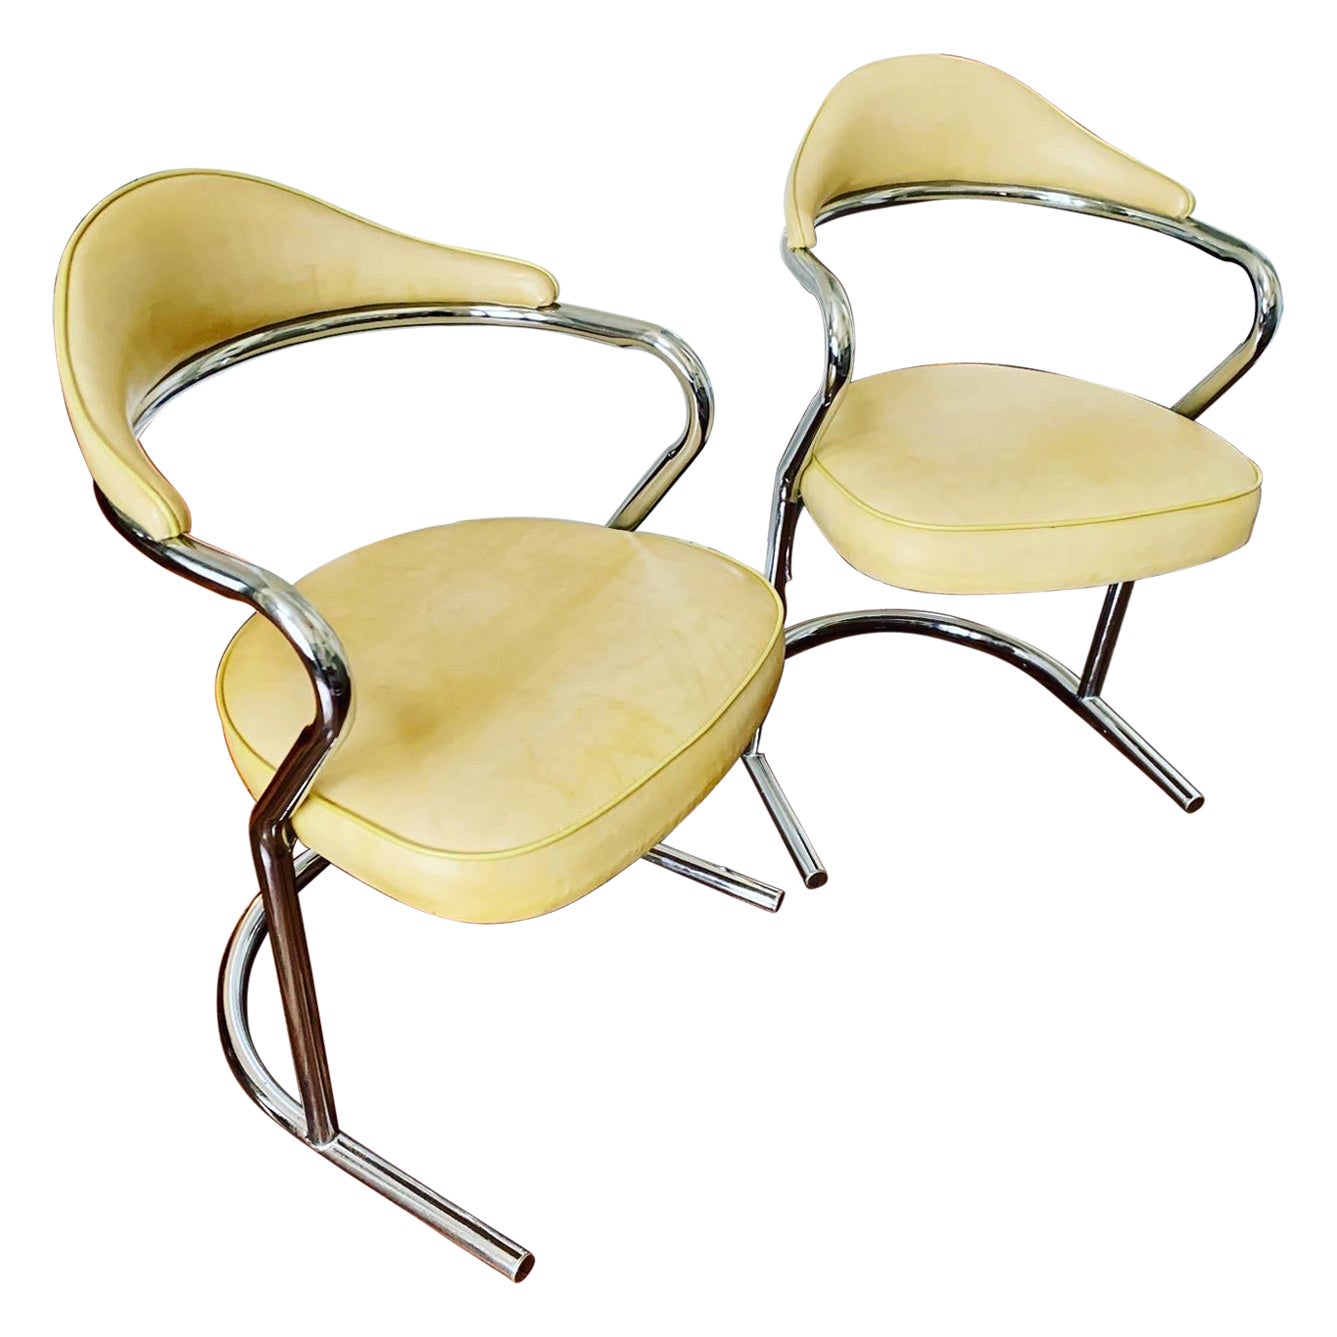 1970's Daystrom Cantilever Chairs, a Pair For Sale